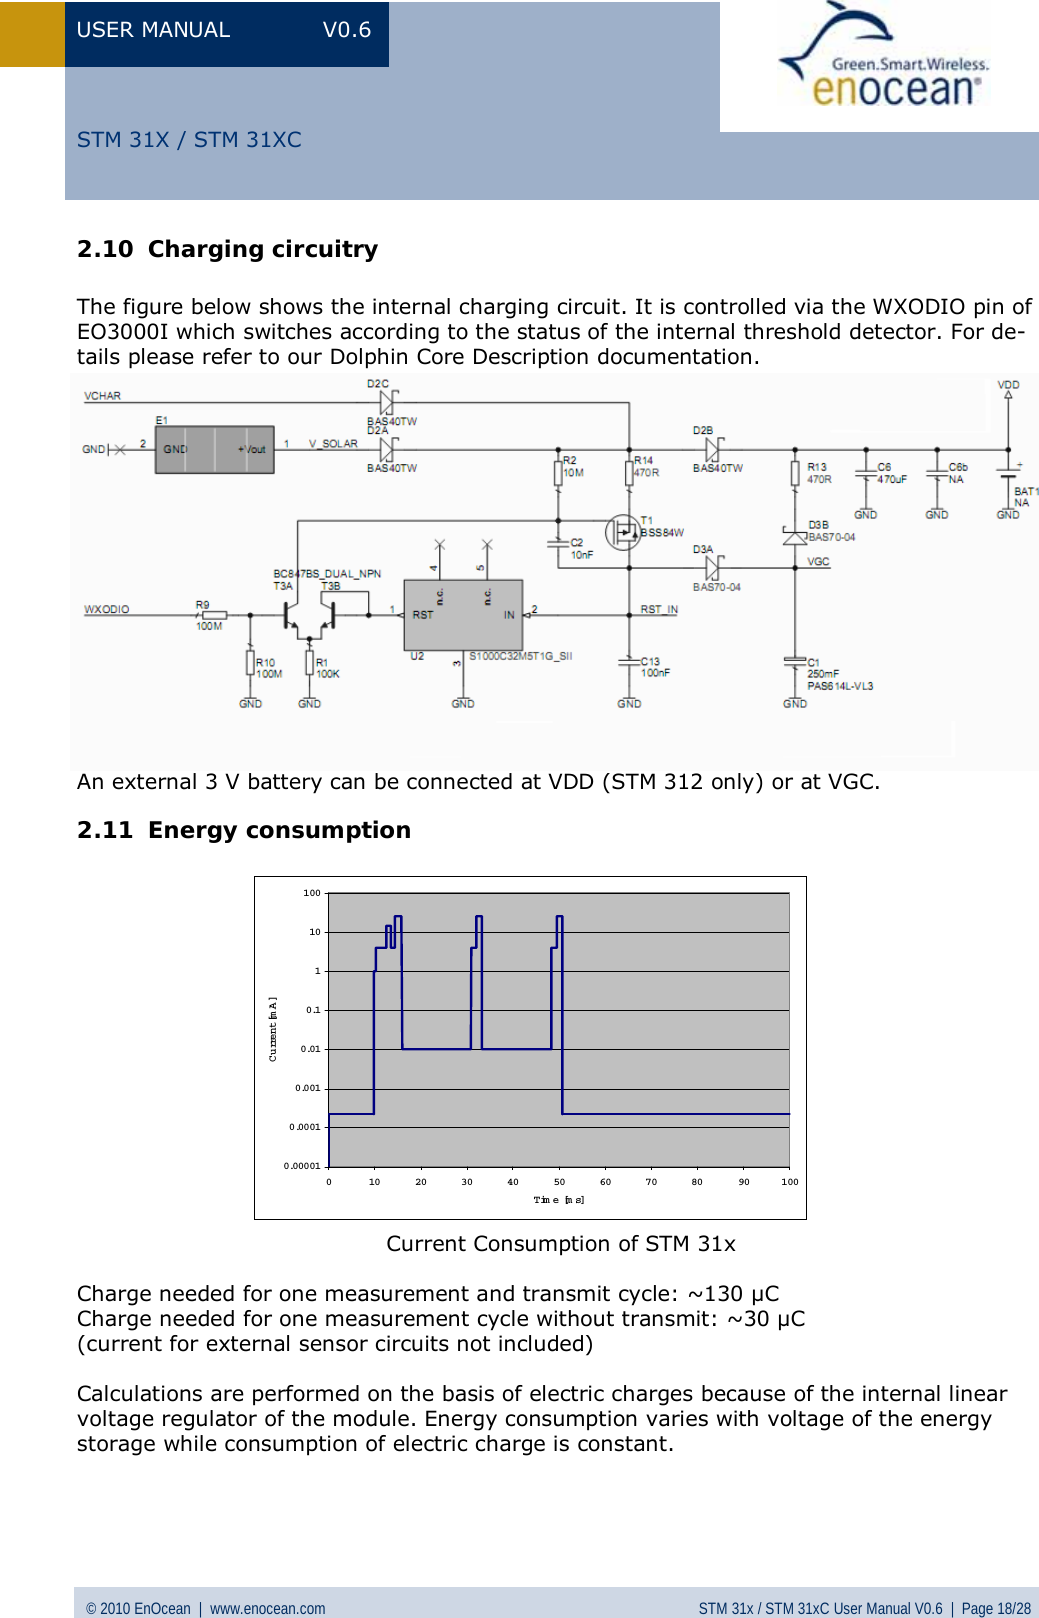 USER MANUAL V0.6 © 2010 EnOcean  |  www.enocean.com STM 31x / STM 31xC User Manual V0.6  |  Page 18/28  STM 31X / STM 31XC2.10 Charging circuitry  The figure below shows the internal charging circuit. It is controlled via the WXODIO pin of EO3000I which switches according to the status of the internal threshold detector. For de-tails please refer to our Dolphin Core Description documentation.                 An external 3 V battery can be connected at VDD (STM 312 only) or at VGC. 2.11 Energy consumption         Current Consumption of STM 31x   Charge needed for one measurement and transmit cycle: ~130 µC  Charge needed for one measurement cycle without transmit: ~30 µC (current for external sensor circuits not included)  Calculations are performed on the basis of electric charges because of the internal linear voltage regulator of the module. Energy consumption varies with voltage of the energy storage while consumption of electric charge is constant.    0.000010.00010.0010.010.11101000 102030405060708090100Time [ms]C u rre n t [mA]